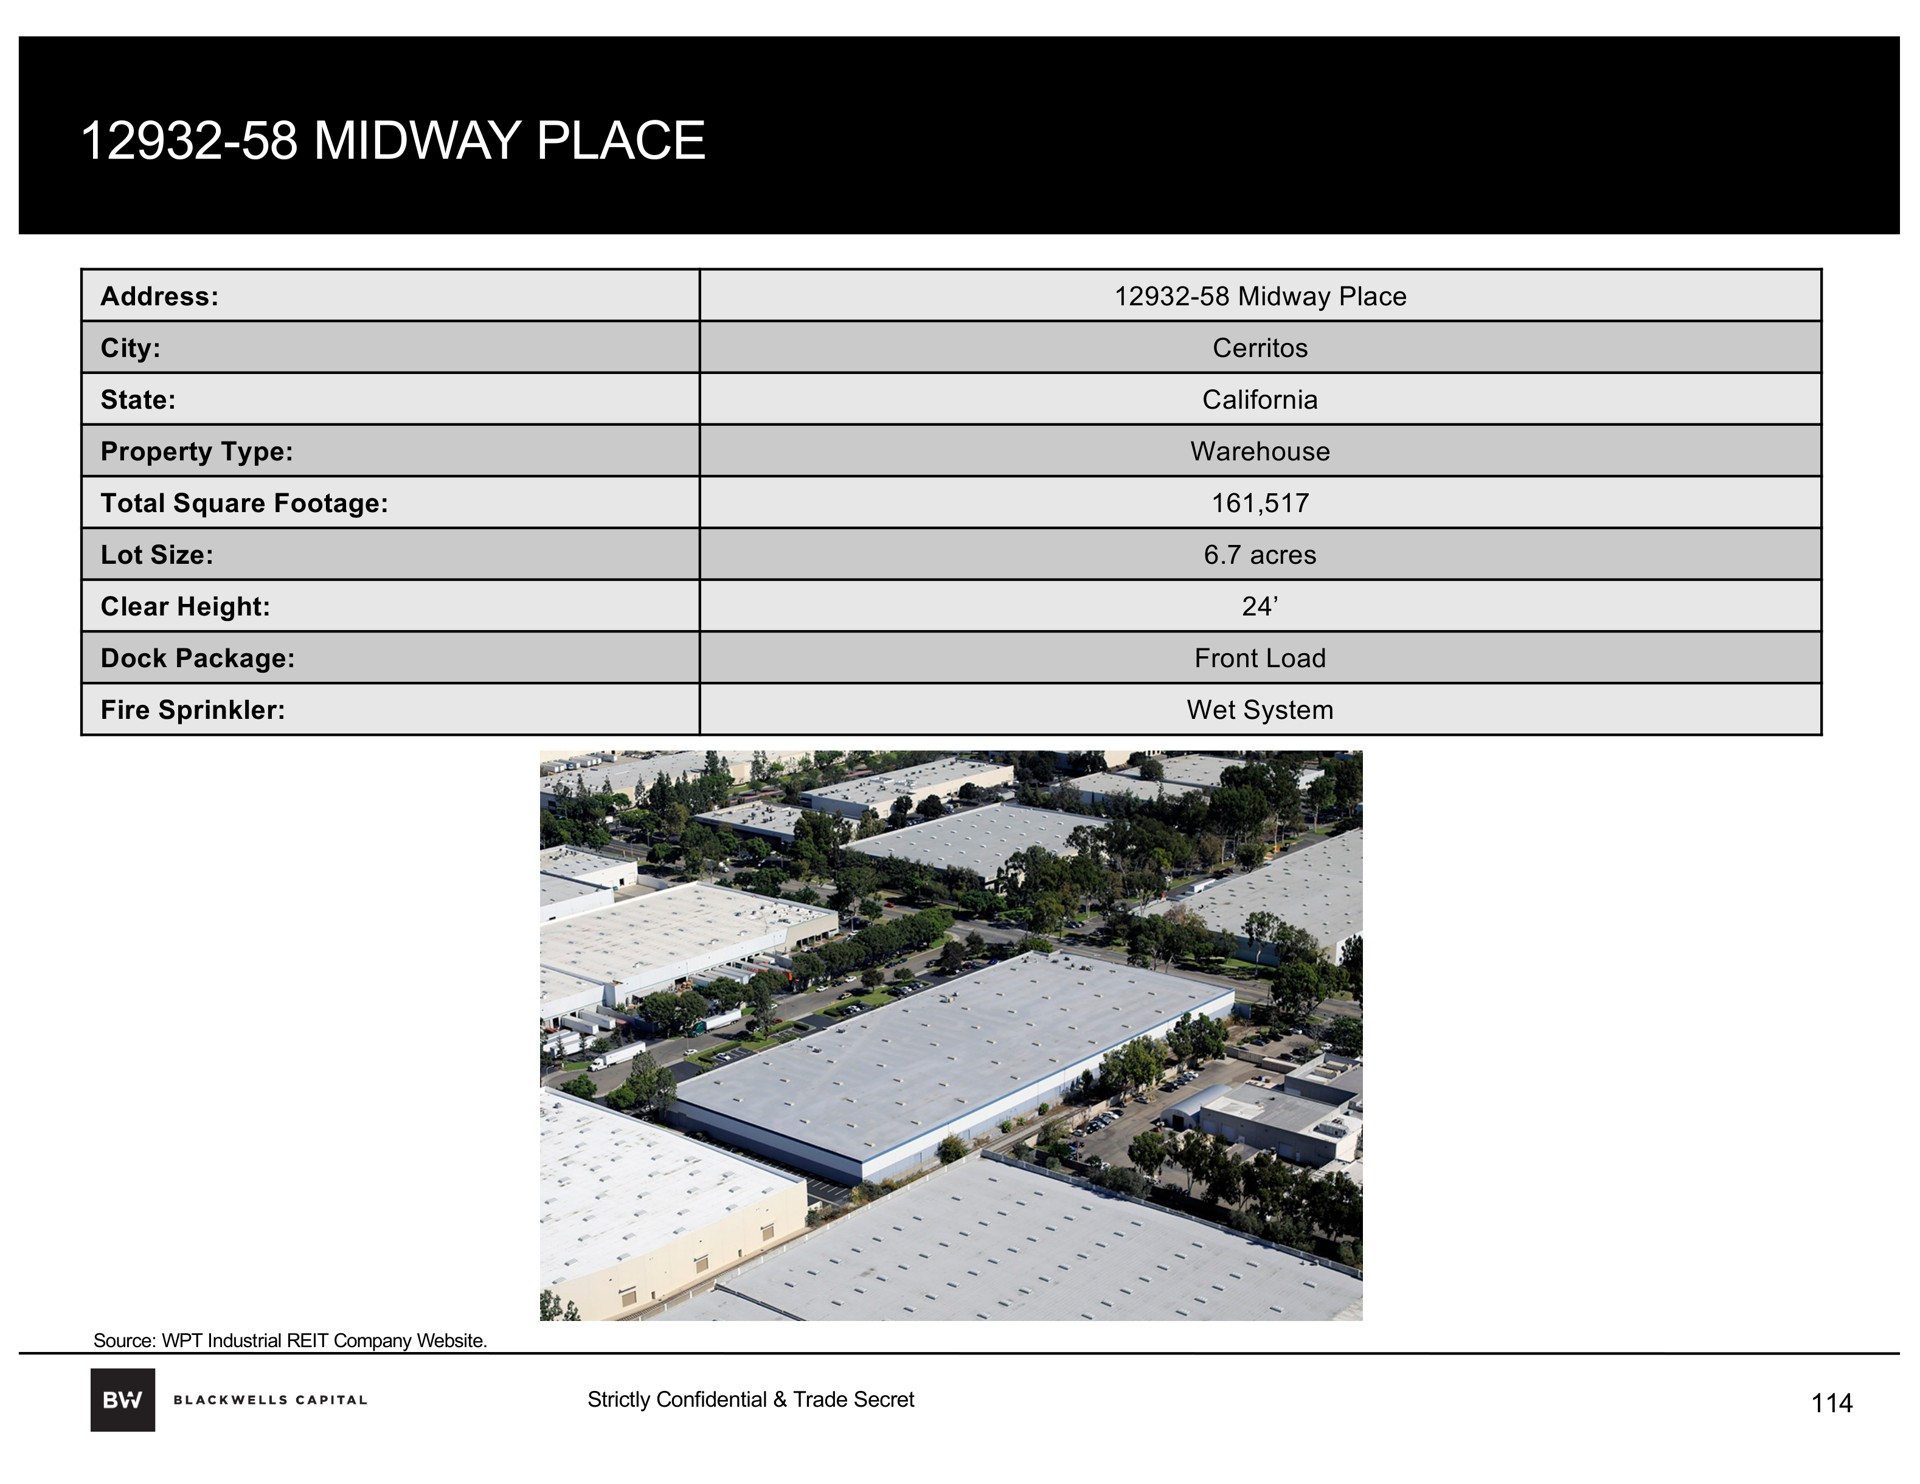 midway place a | Blackwells Capital